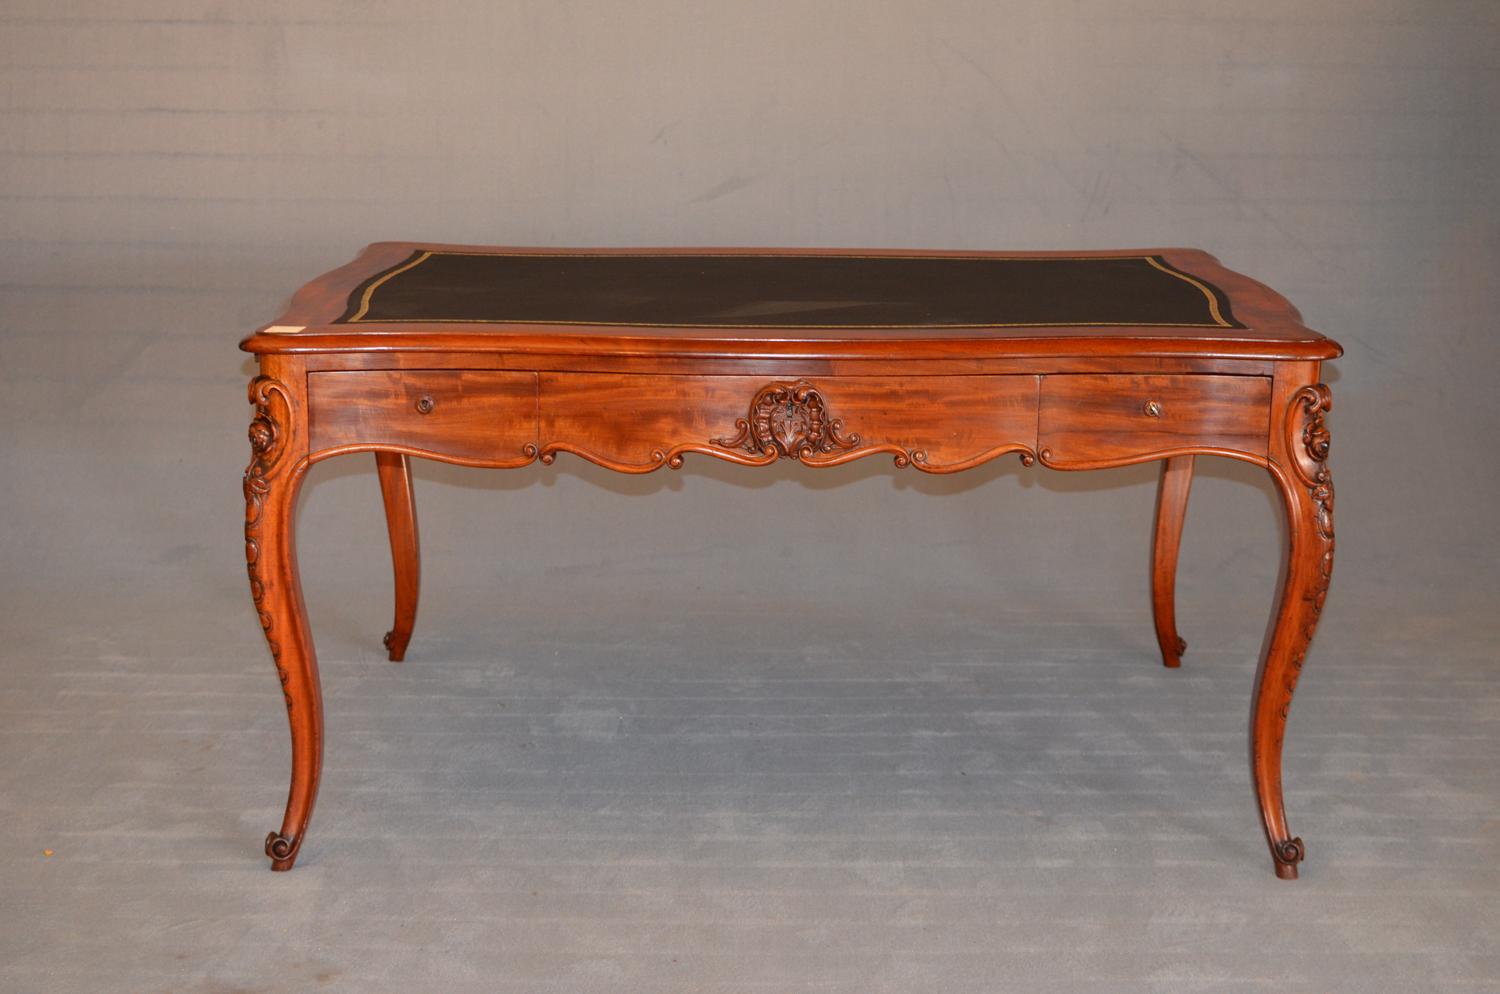 This Louis Philippe wooden desk in mahogany was produced in France at the beginning of the 19th century. The desk is equipped with drawers on both sides and extractable shelves on the sides. The shaped top is upholstered in black leather, the charm